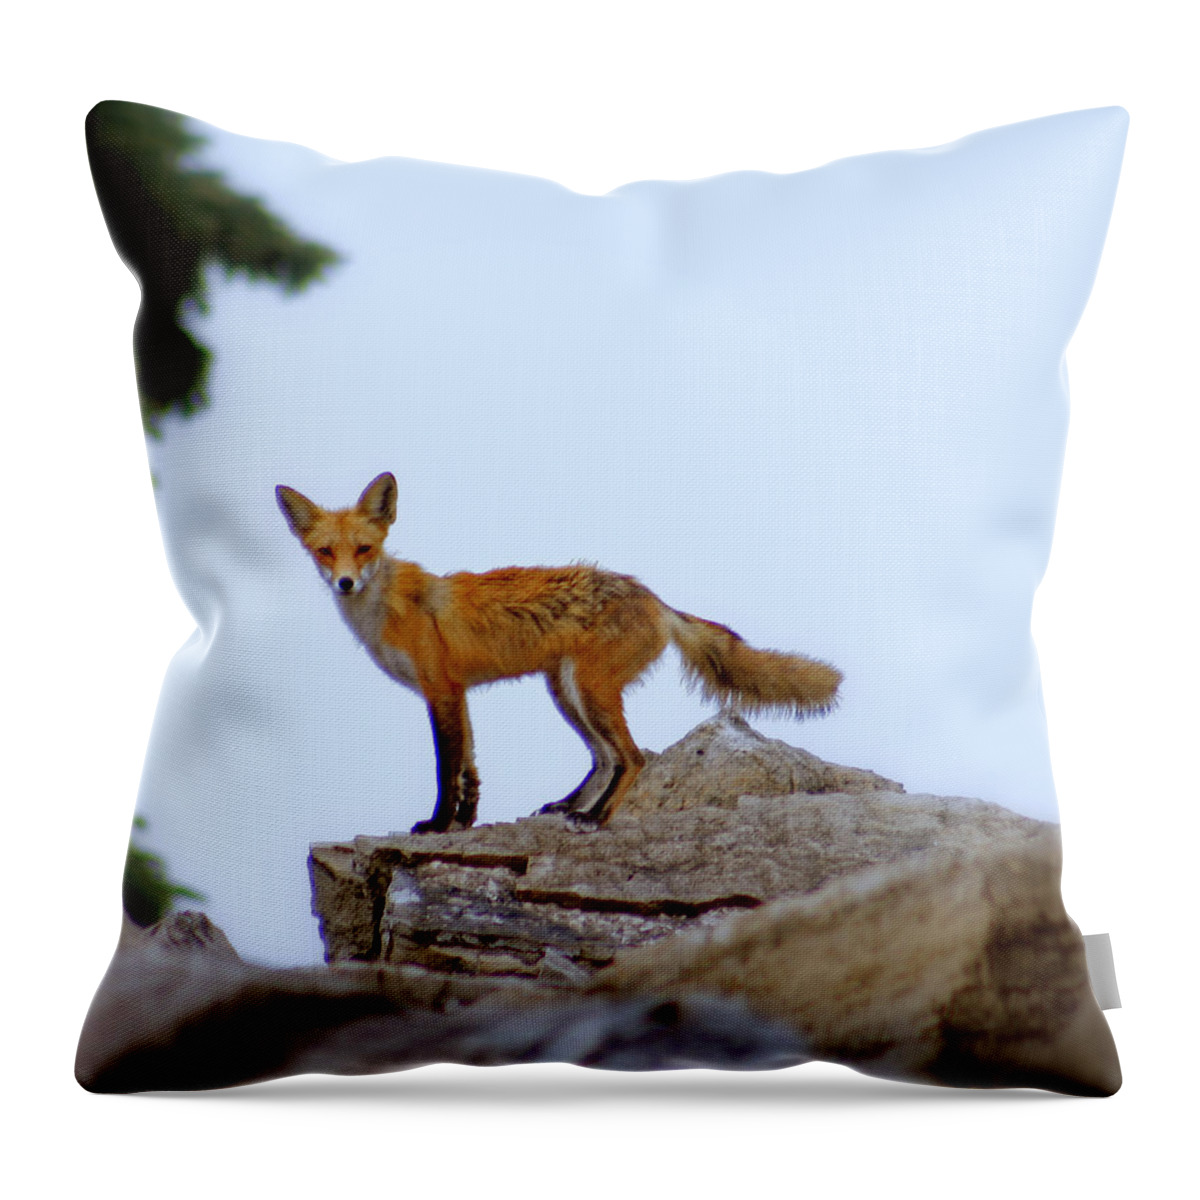 Fox Throw Pillow featuring the photograph A Fox On The Rocks by Kay Novy